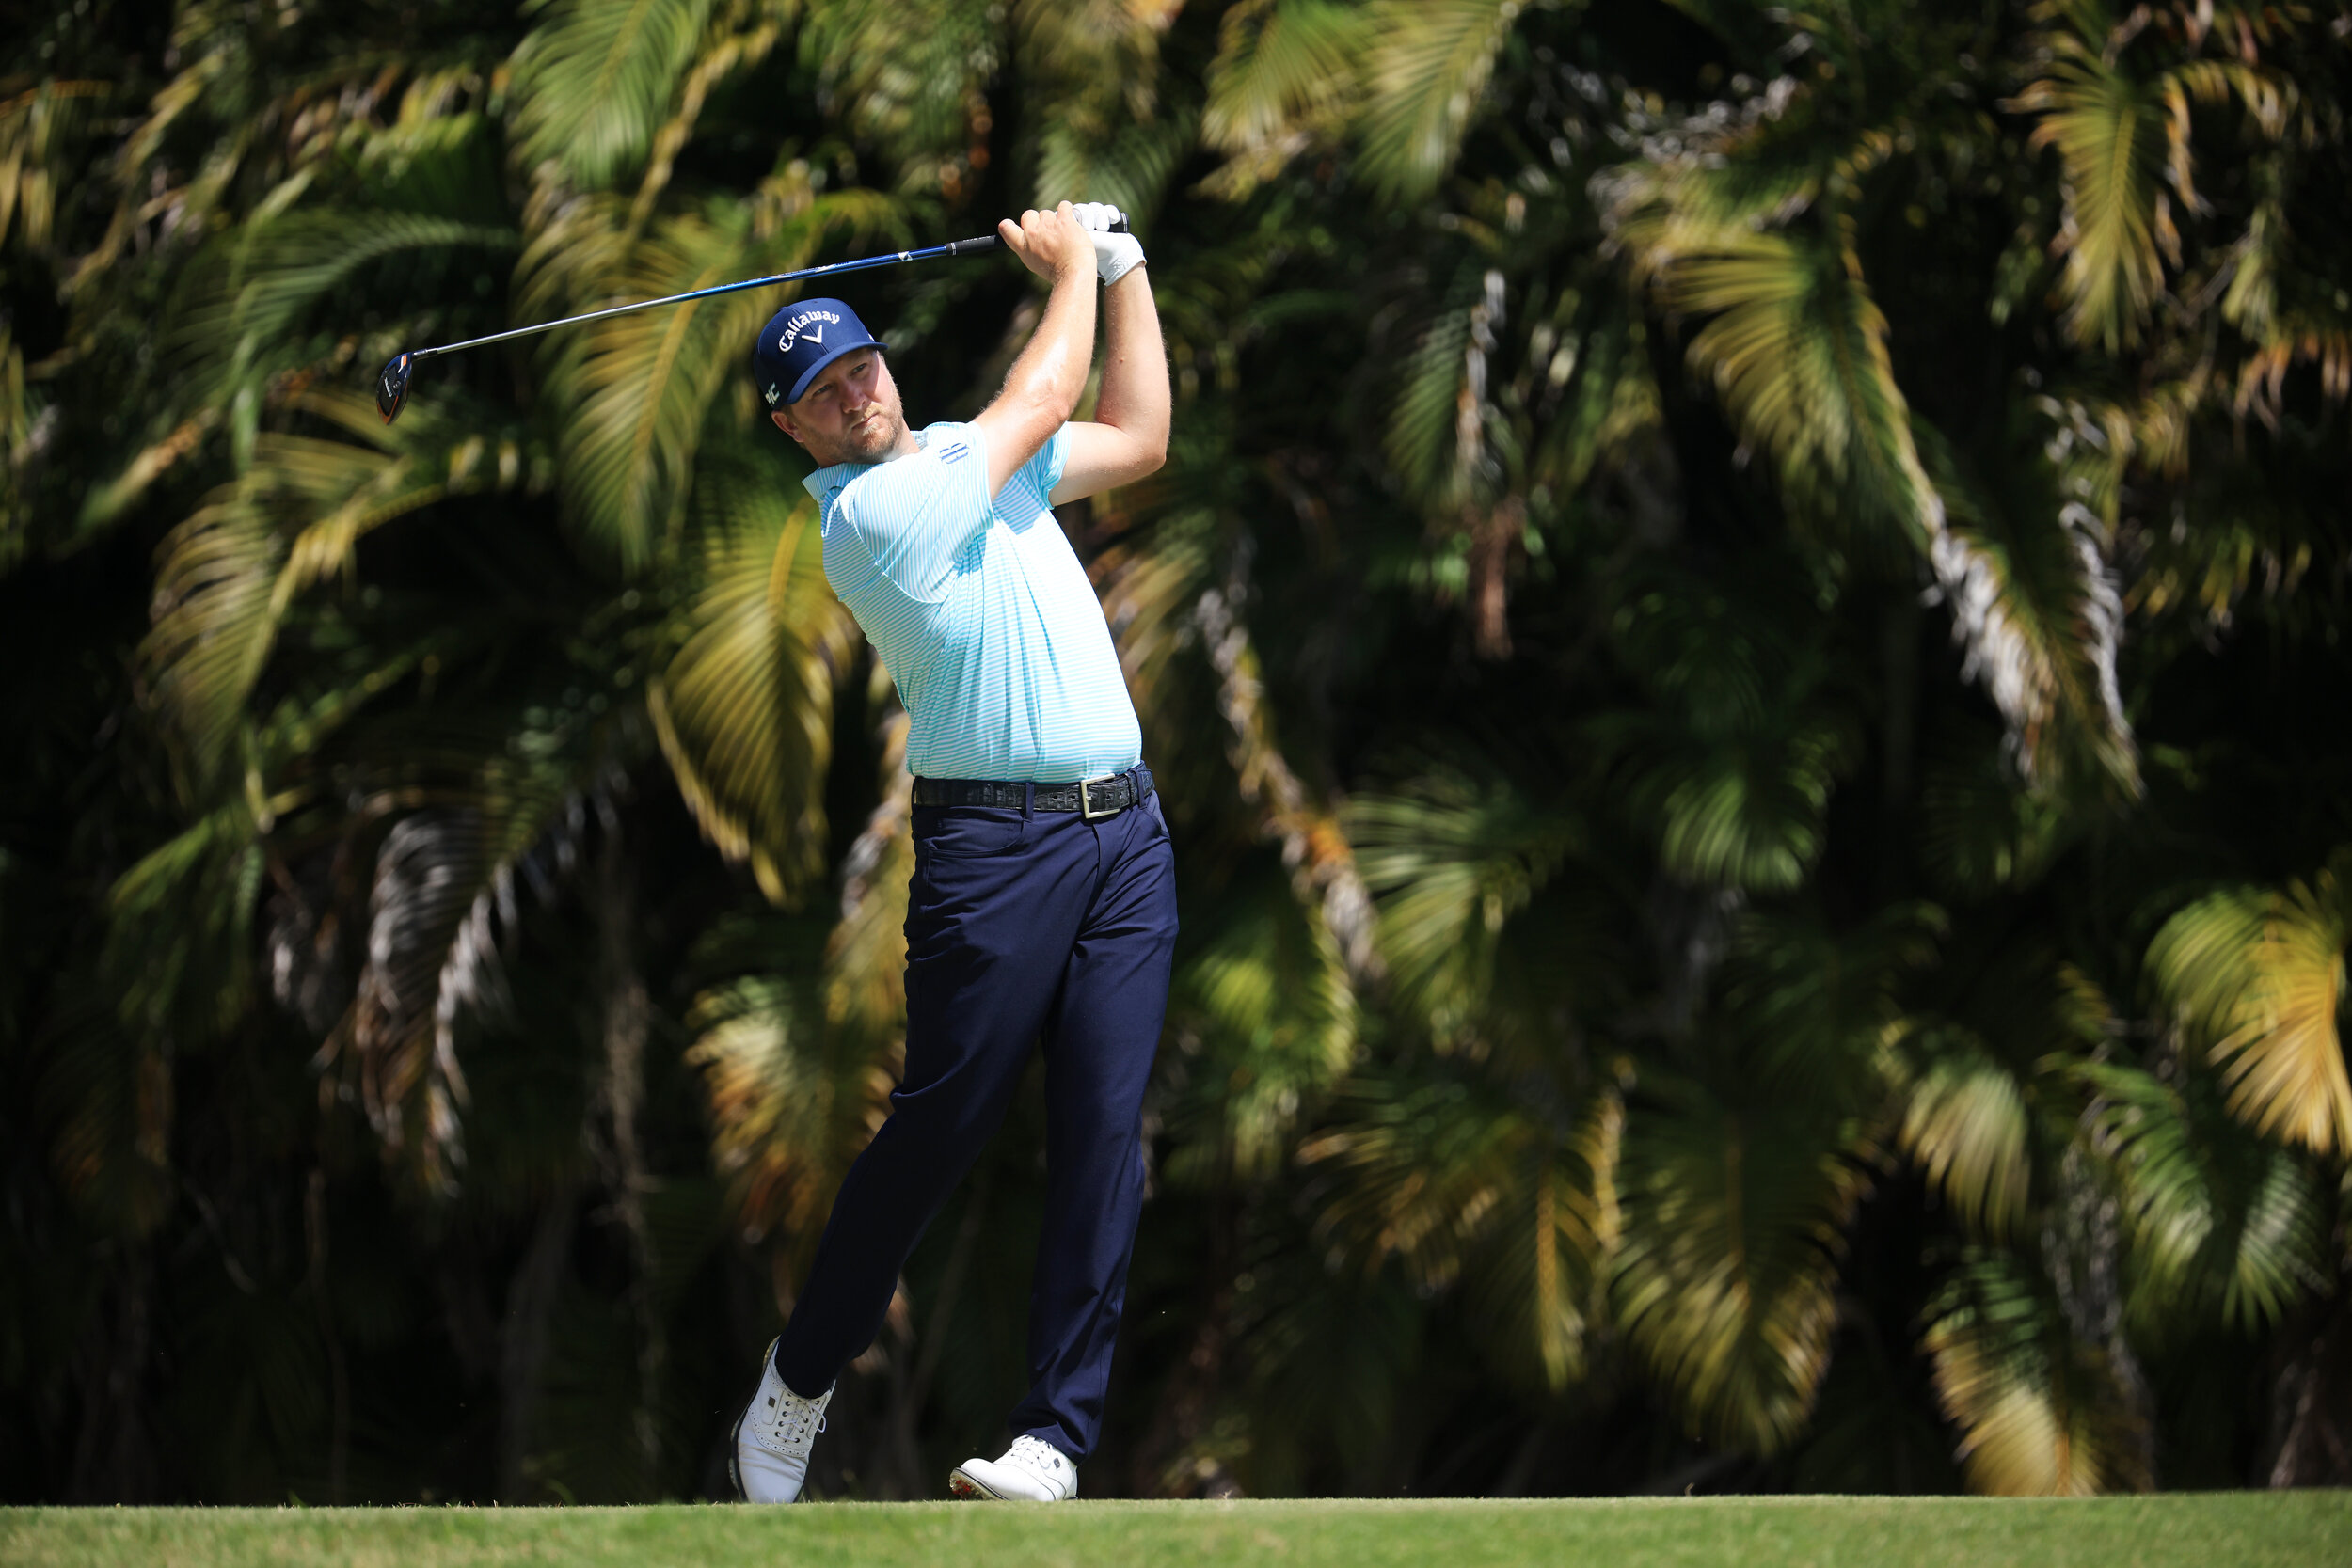  RIO GRANDE, PUERTO RICO - FEBRUARY 28:  Brice Garnett of the United States plays his shot from the fourth tee during the final round of the Puerto Rico Open at the Grand Reserve Country Club on February 28, 2021 in Rio Grande, Puerto Rico. (Photo by